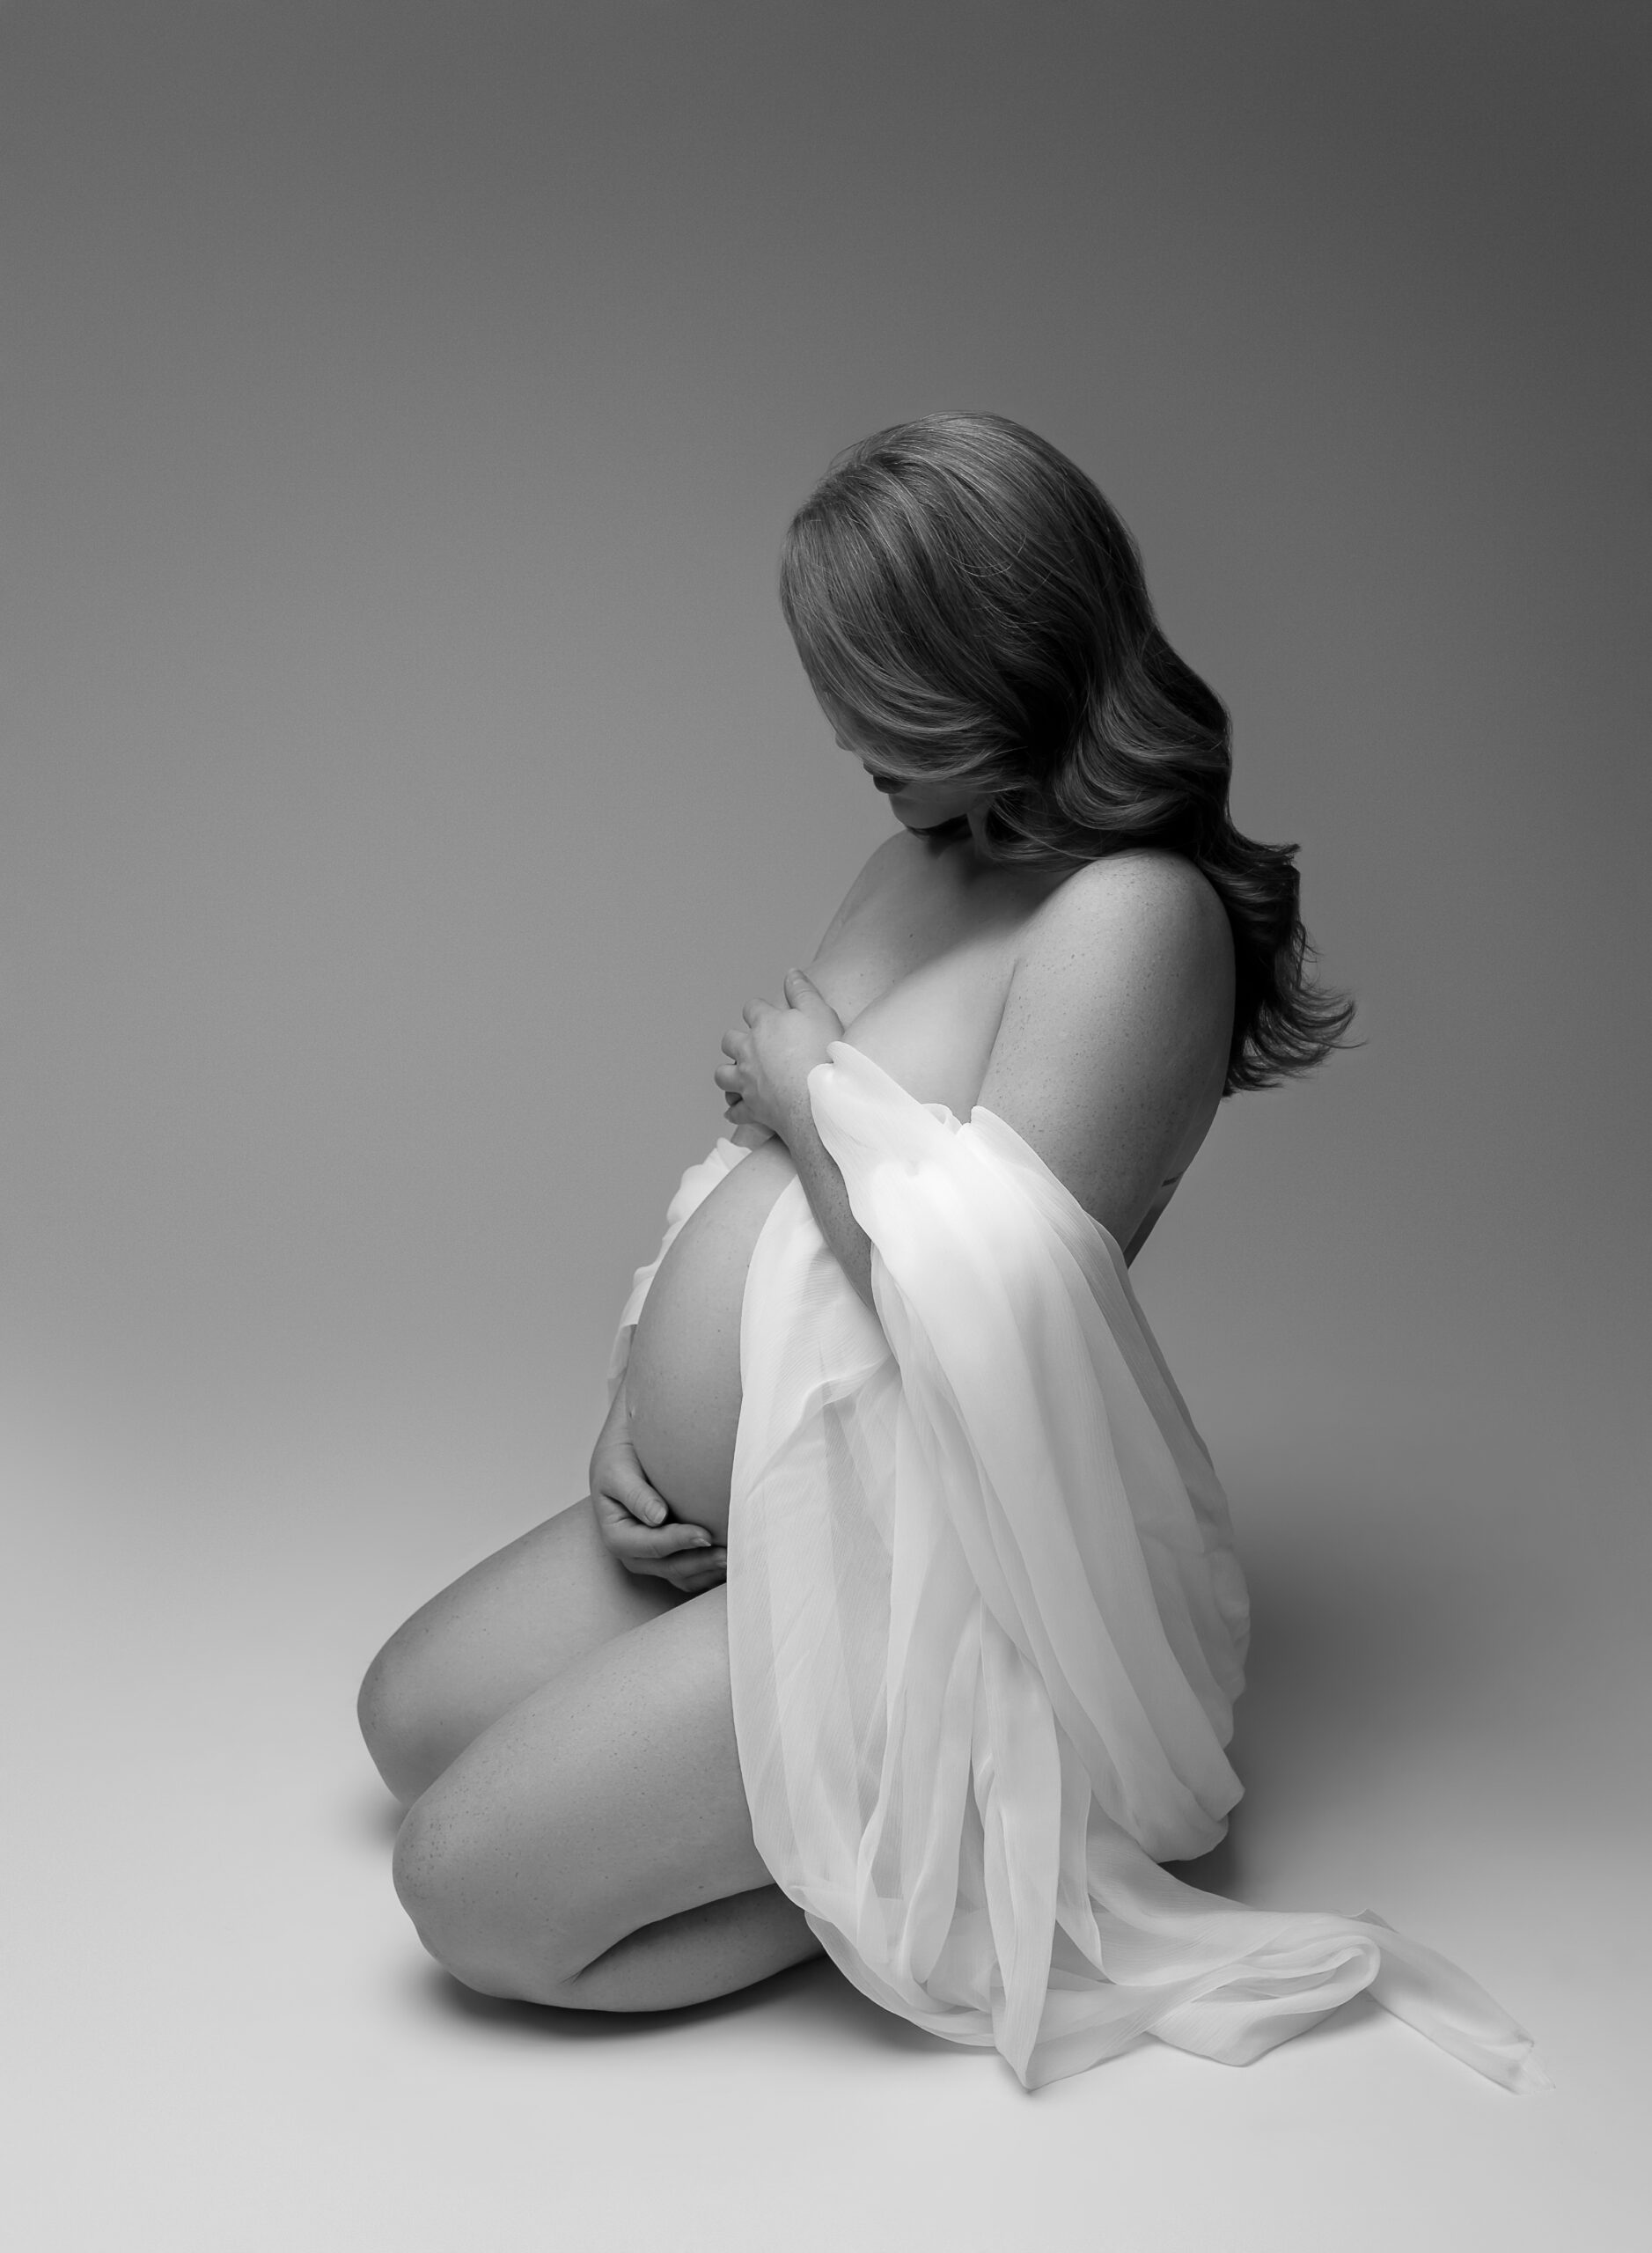 Black and white photo of a pregnant woman on a neutral background. She is kneeling, has white fabric draped around her shoulders, and his holding her baby bump. 